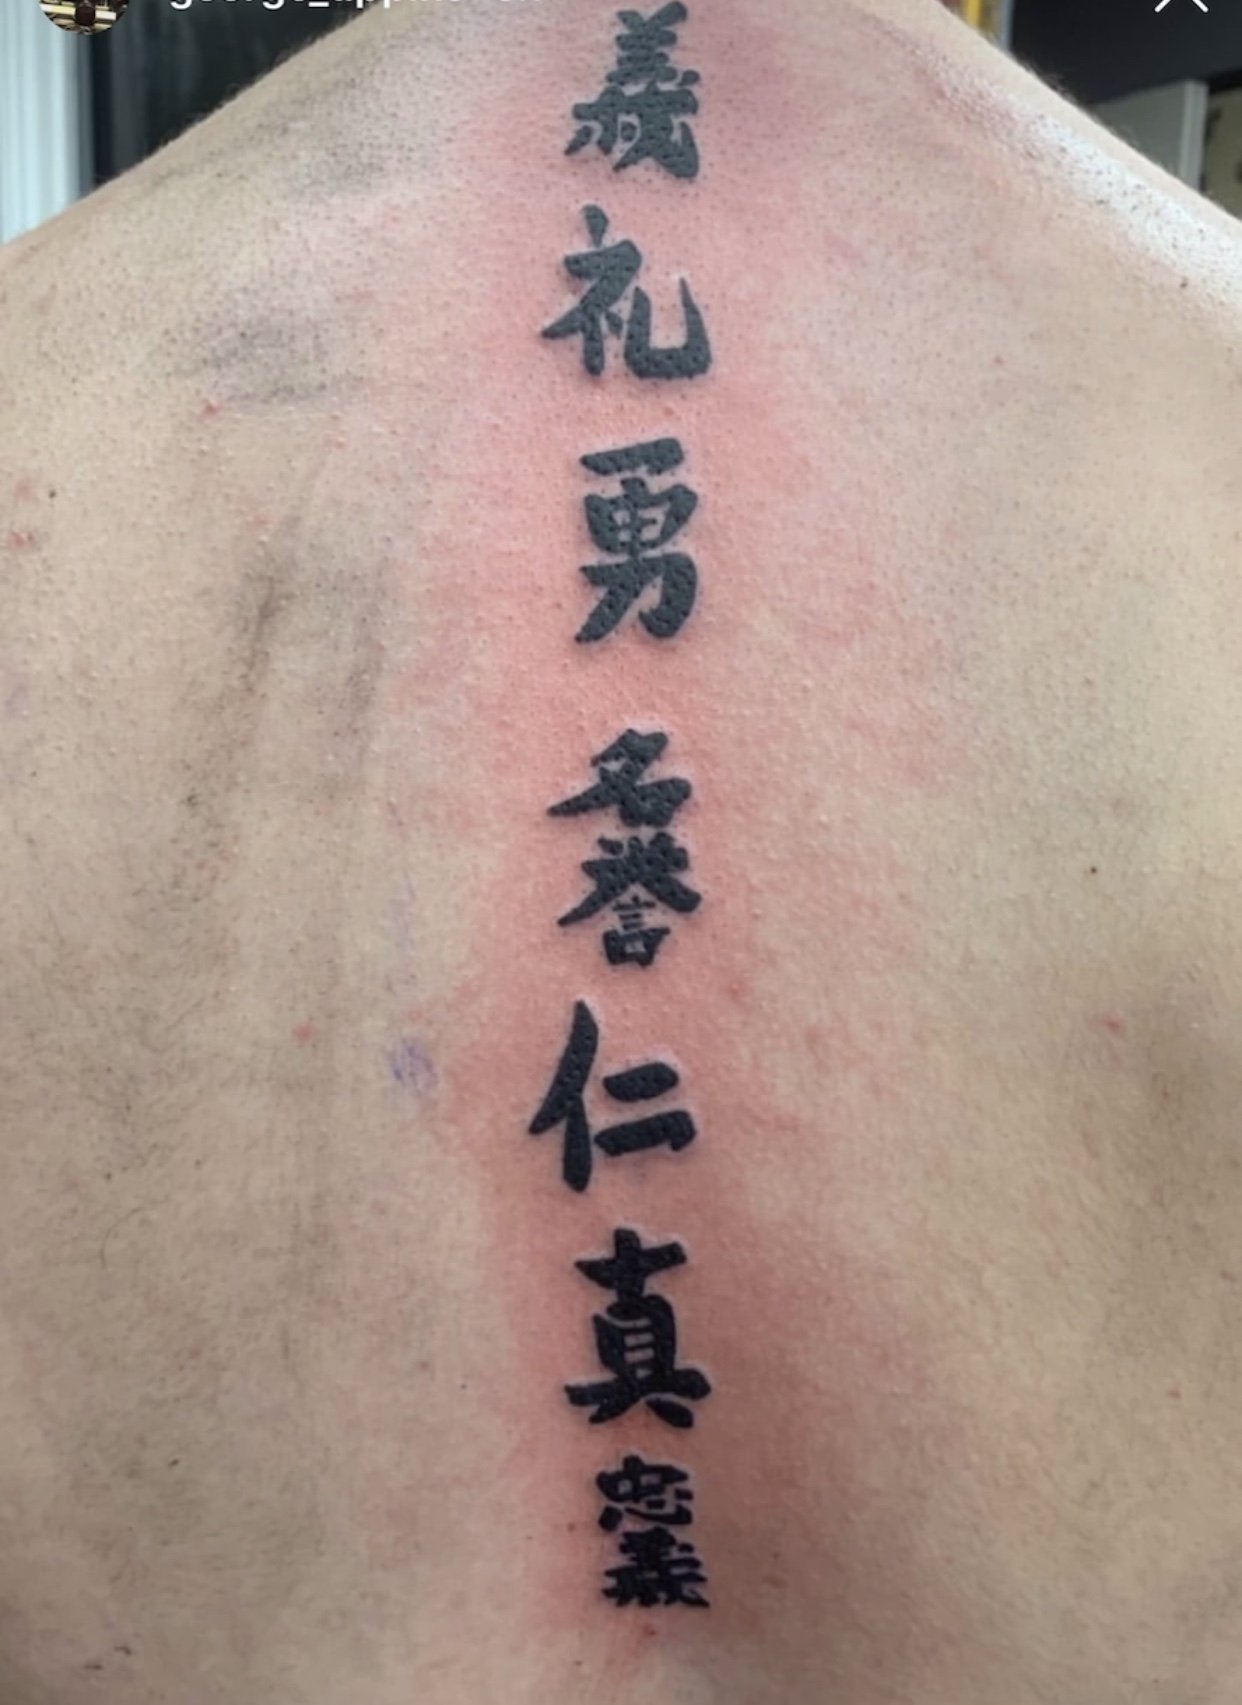 Please translate this tattoo to English!! - Tattoos, Names and Quick  Translations 